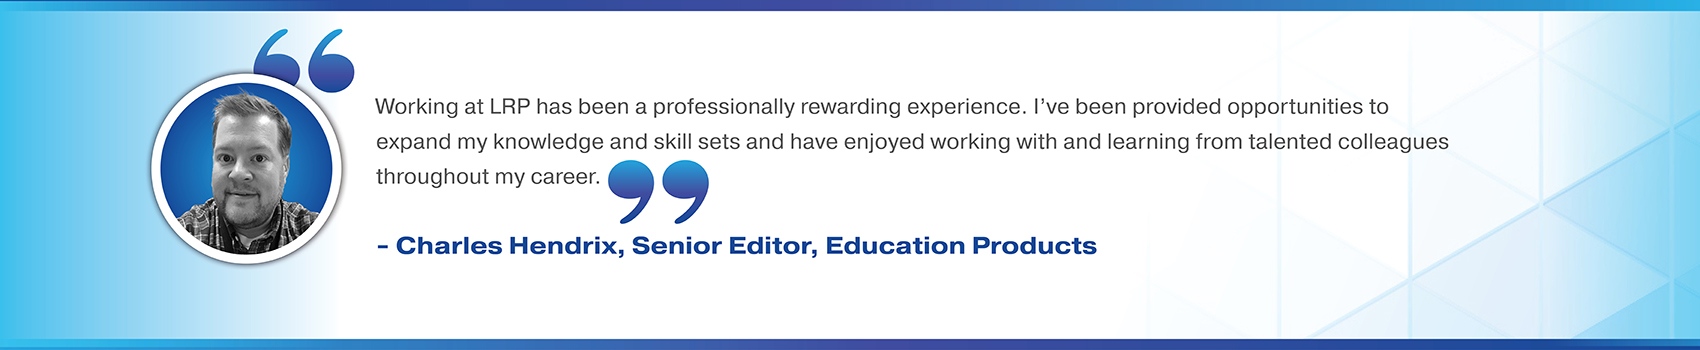 Working at LRP has been a professionally rewarding experience. I've been provided opportunities to expand my knowledge and skill sets and have enjoyed working with and learning from talented colleagues throughout my career. Charles Hendrix, Senior Editor, Education Products